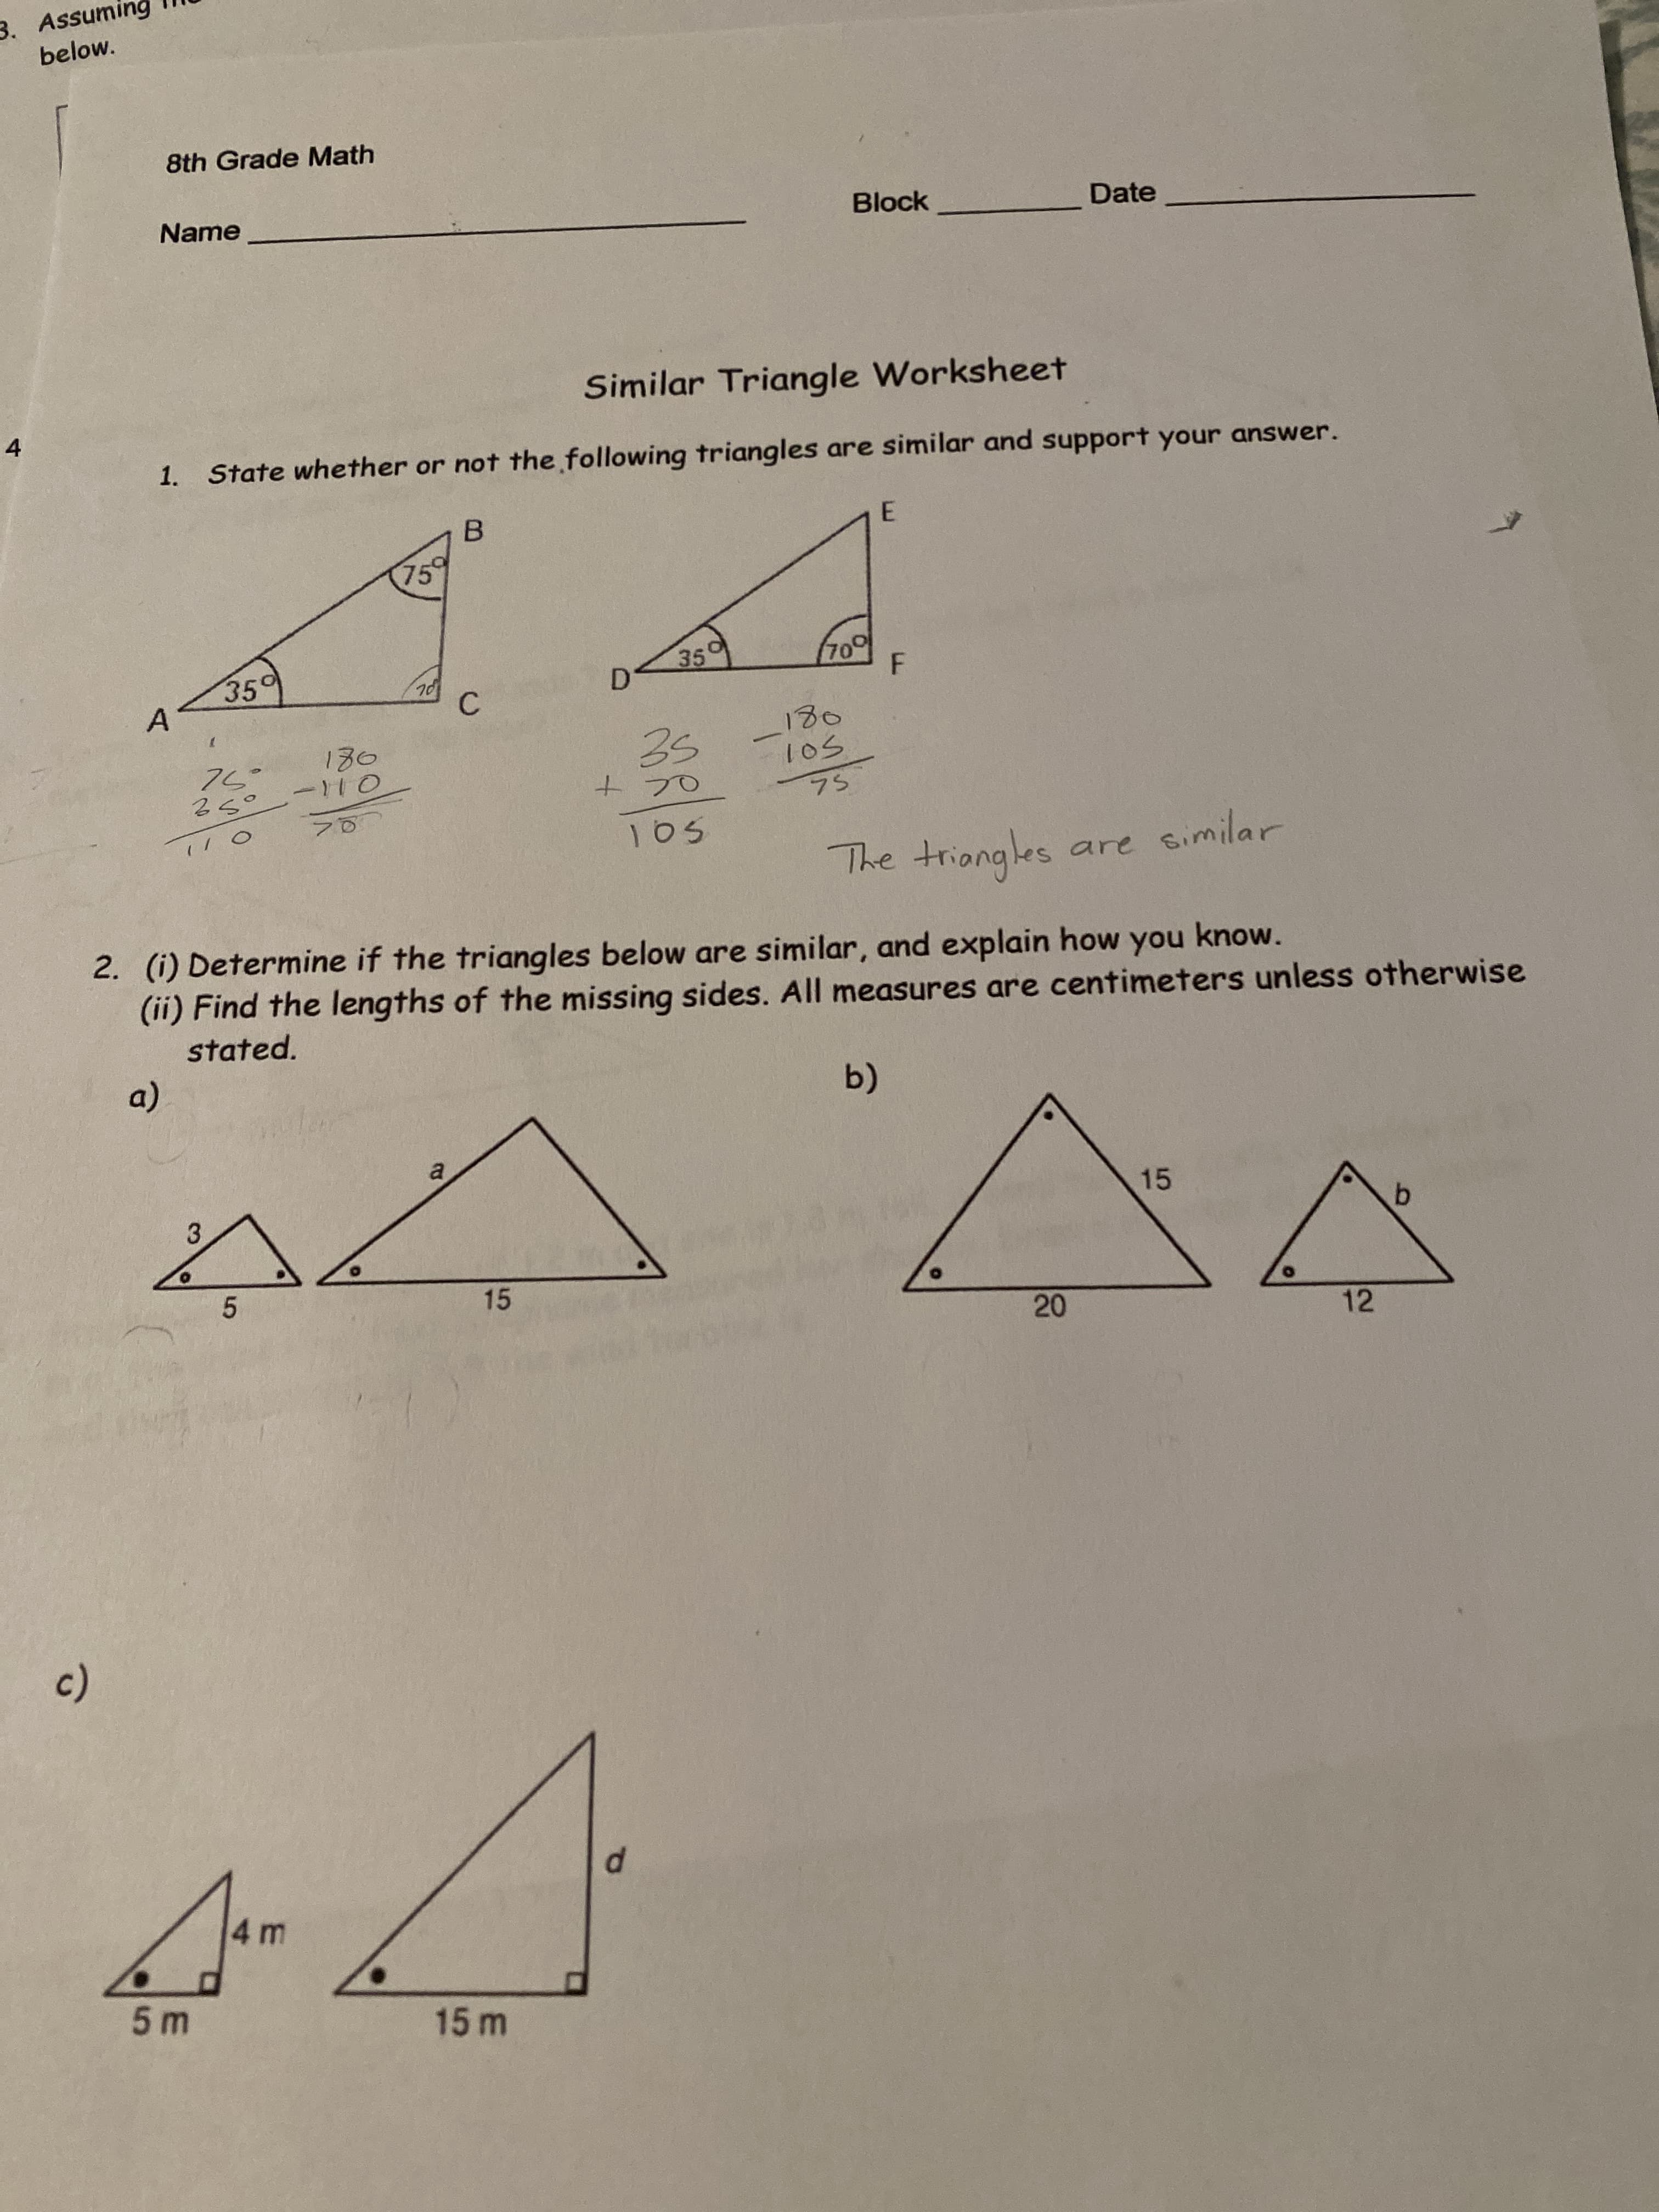 Similar Triangle Worksheet
1. State whether or not the following triangles are similar and support your answer.
759
35°
A
700
F
35°
130
35
180
1os
